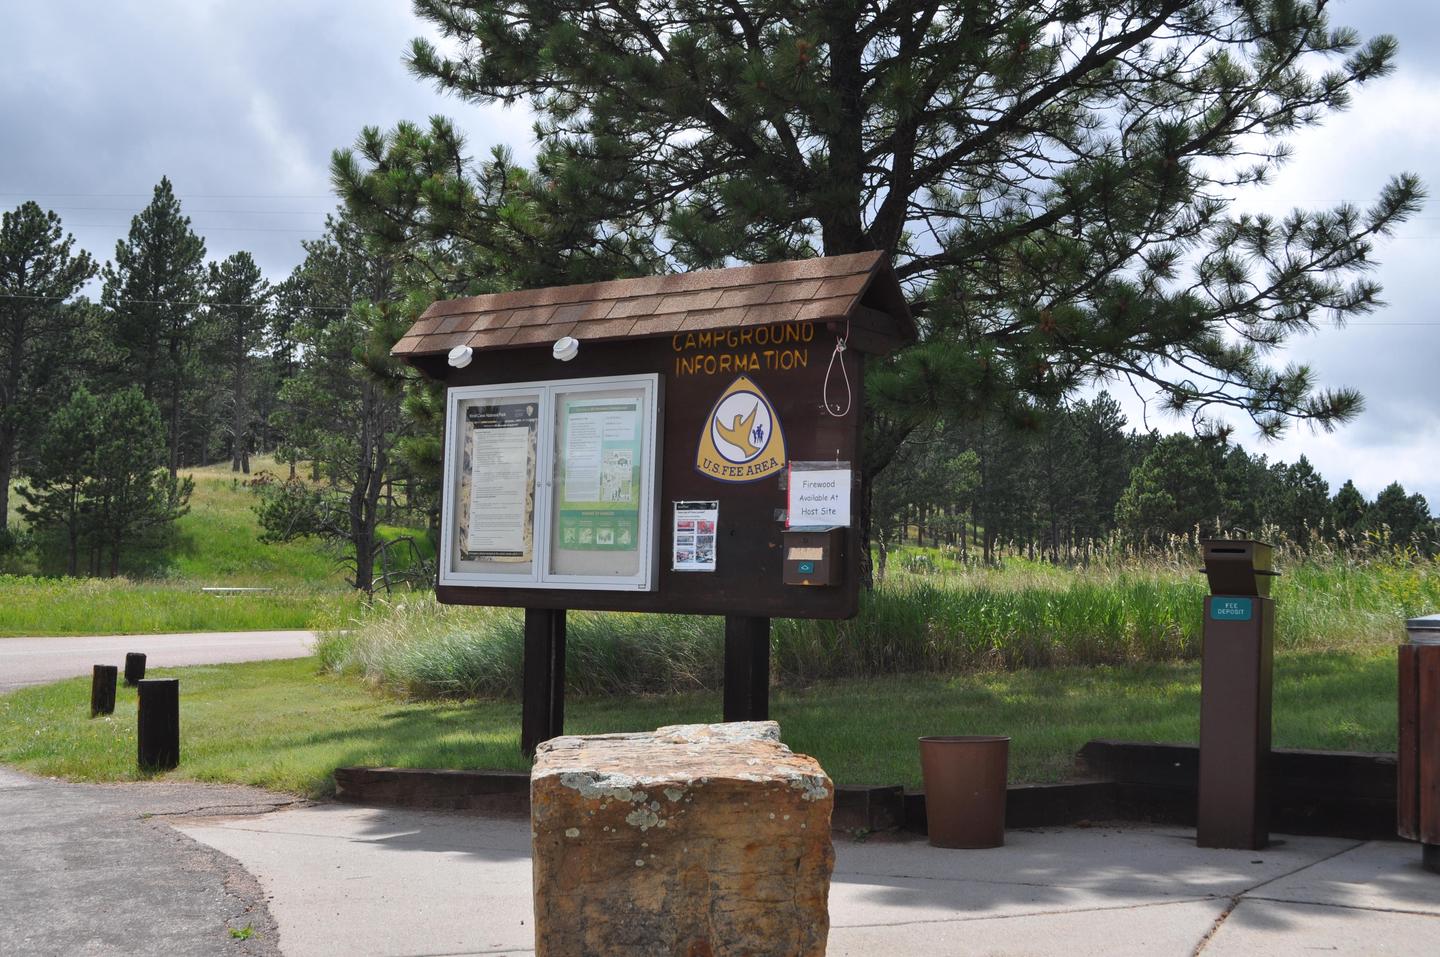 Elk Mountain Campground Registration BoardThe Elk Mountain Campground is a first-come, first-served site. Campers can register the campsite of their choice the day of their stay, and drop their cash payment in the drop box.